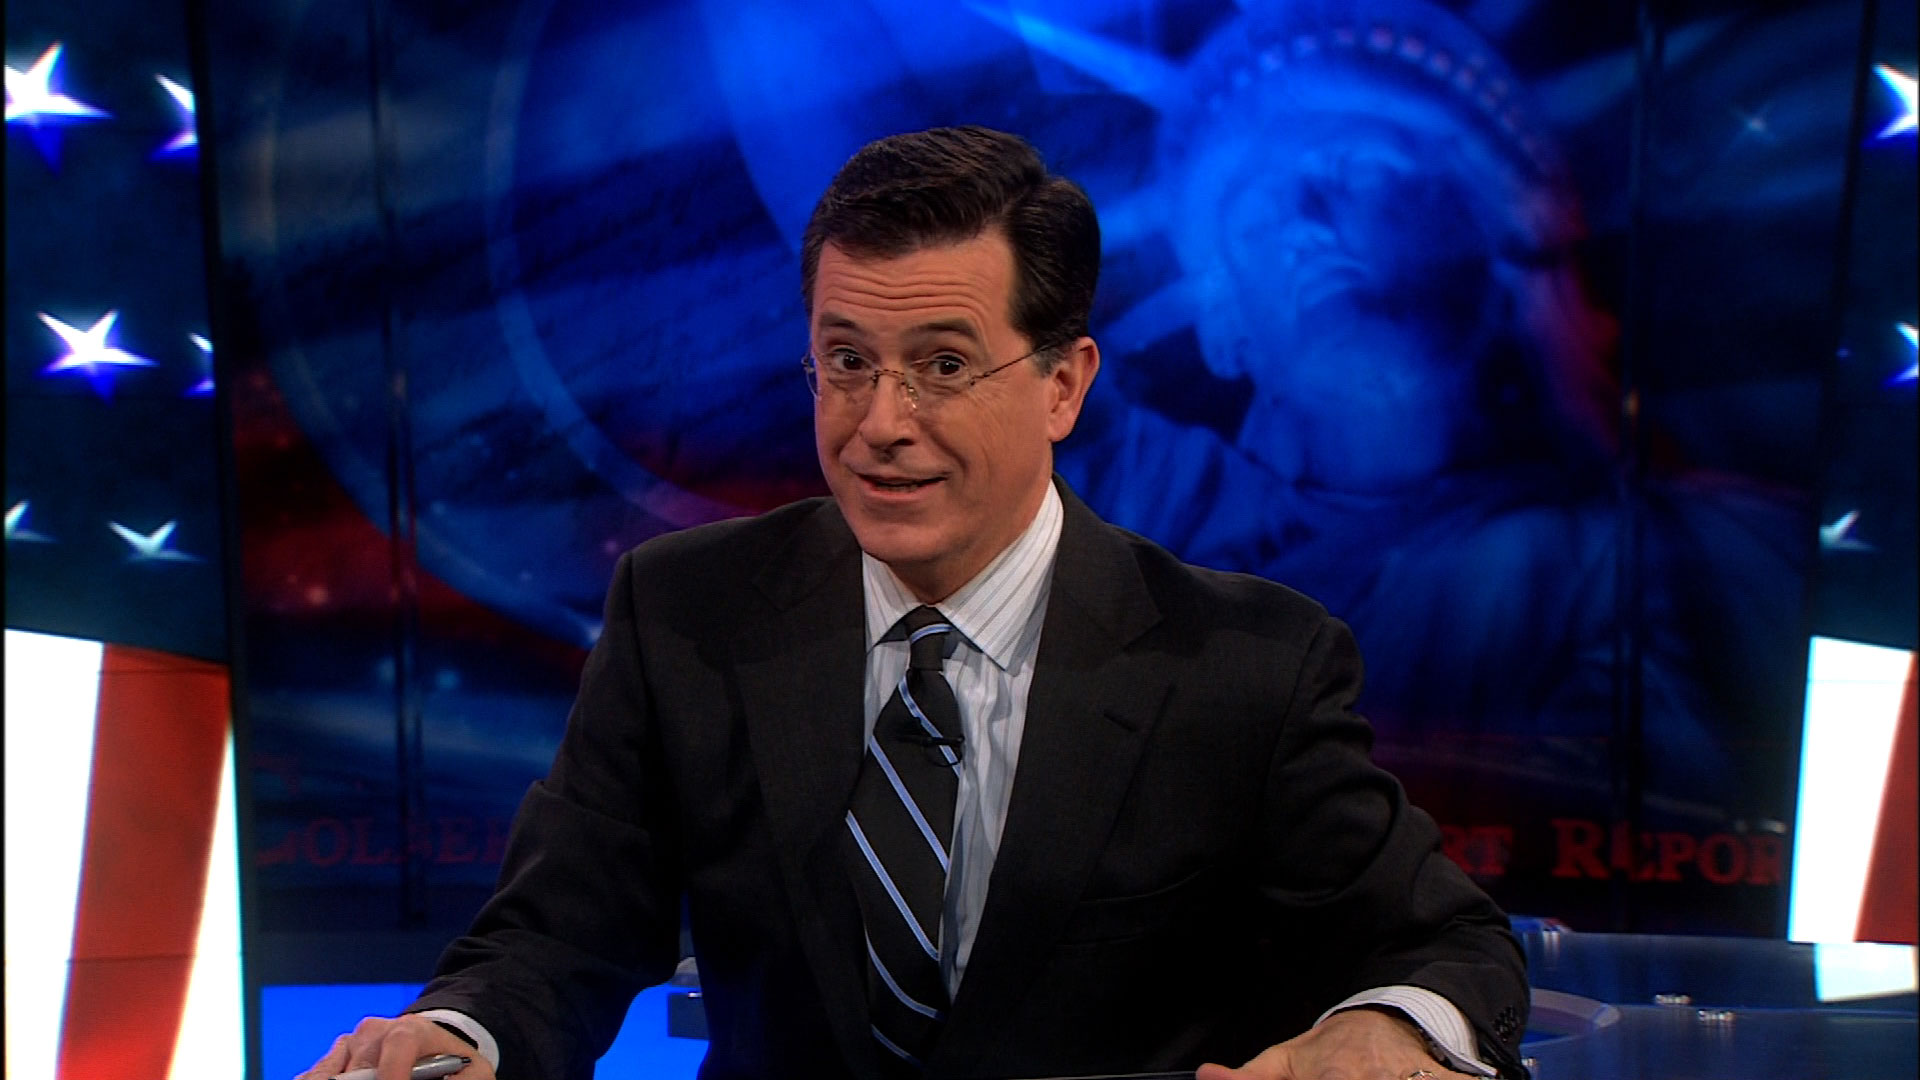 Studies show that Stephen Colbert was more effective than journalists at explaining campaign financing during the last elections. (<a href="http://ebaum.it/1o0D0c" target="_blank">Deadline Holywood</a>)